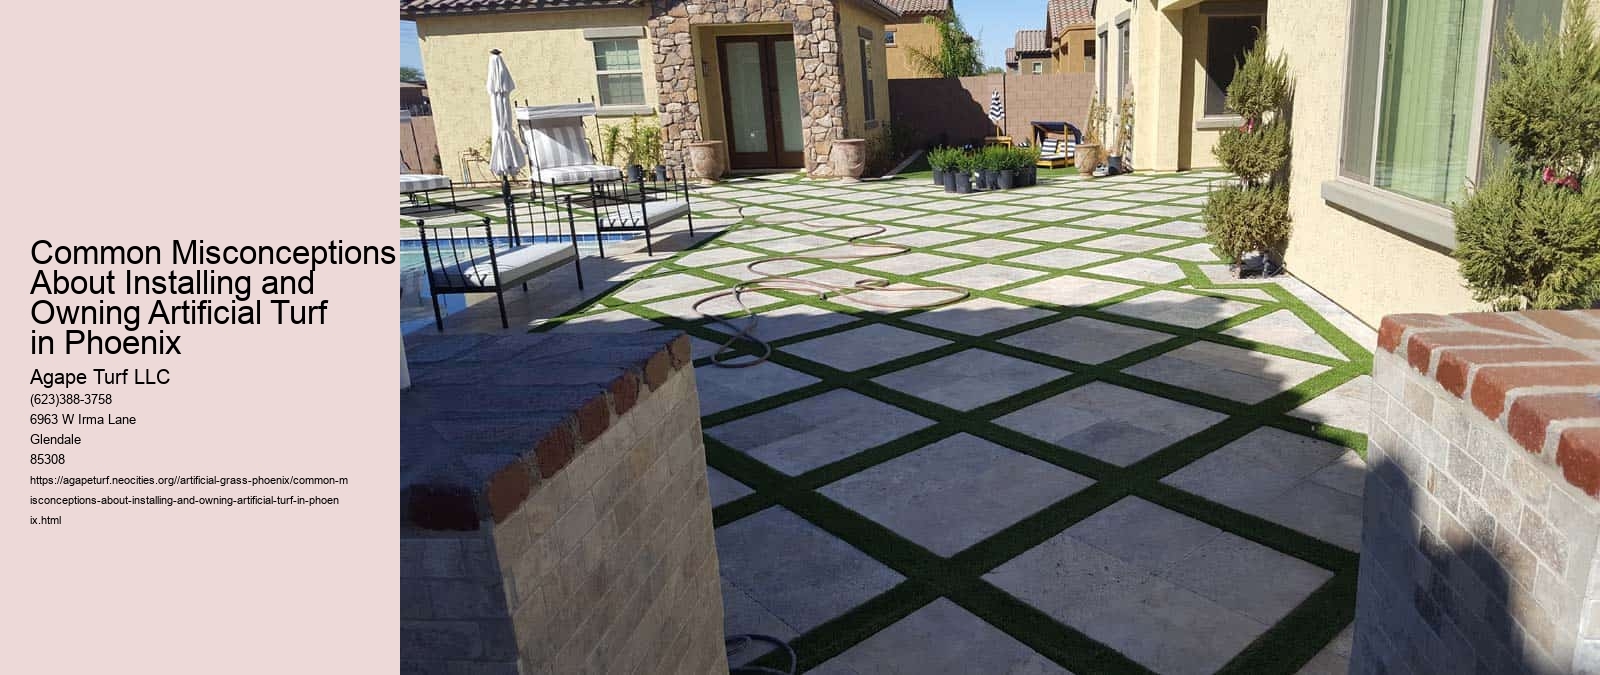 Common Misconceptions About Installing and Owning Artificial Turf in Phoenix